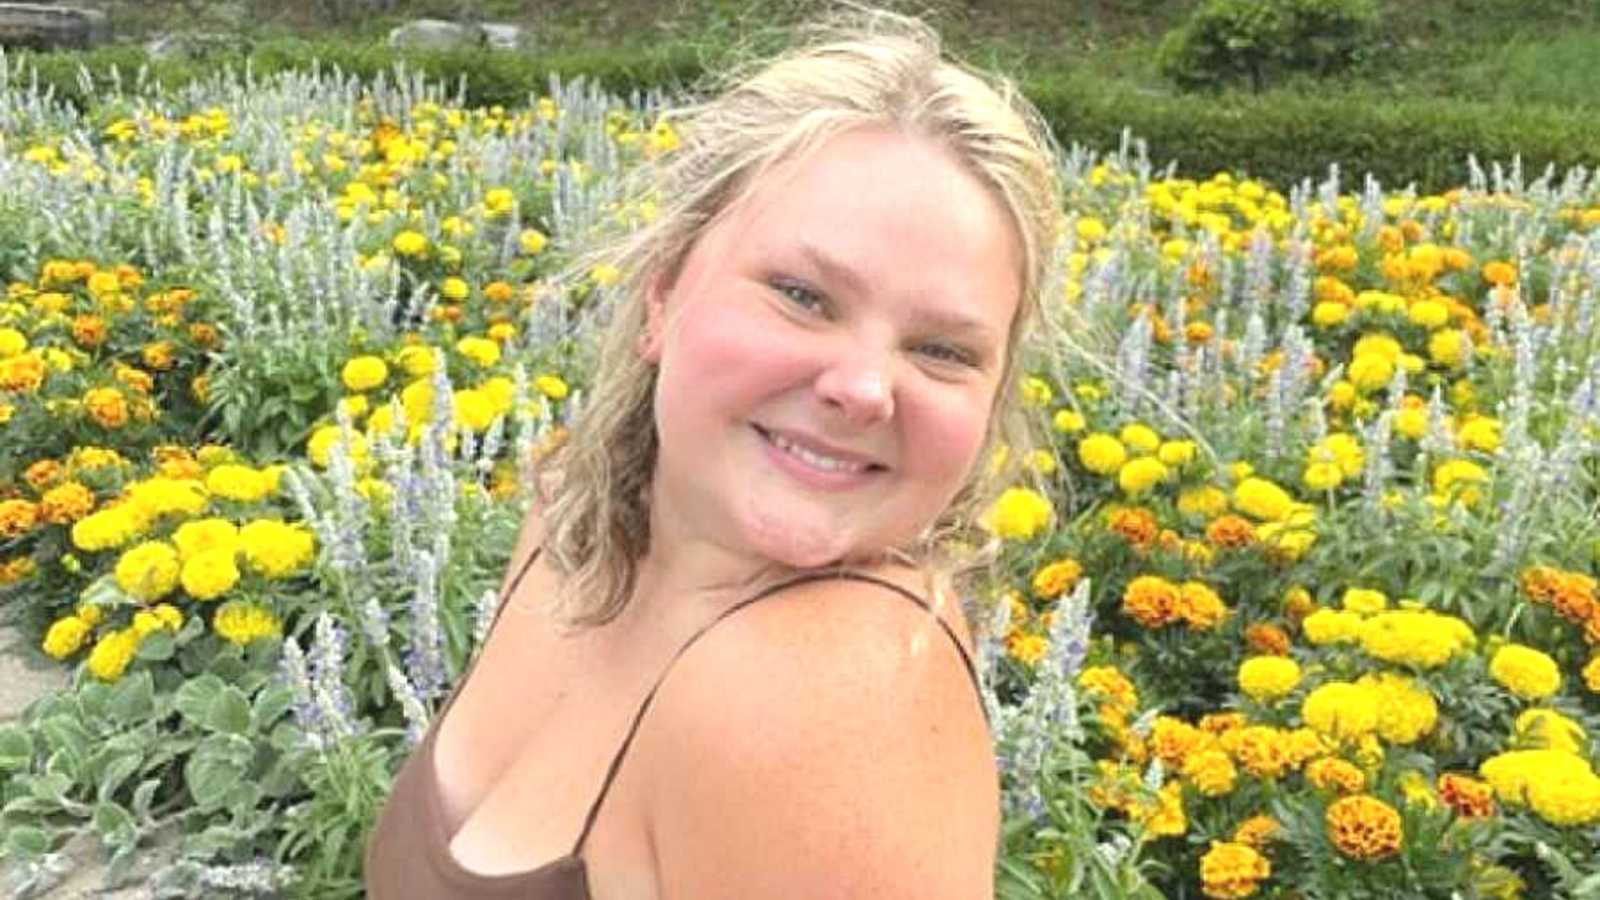 Woman struggling with mental health stands by flowers